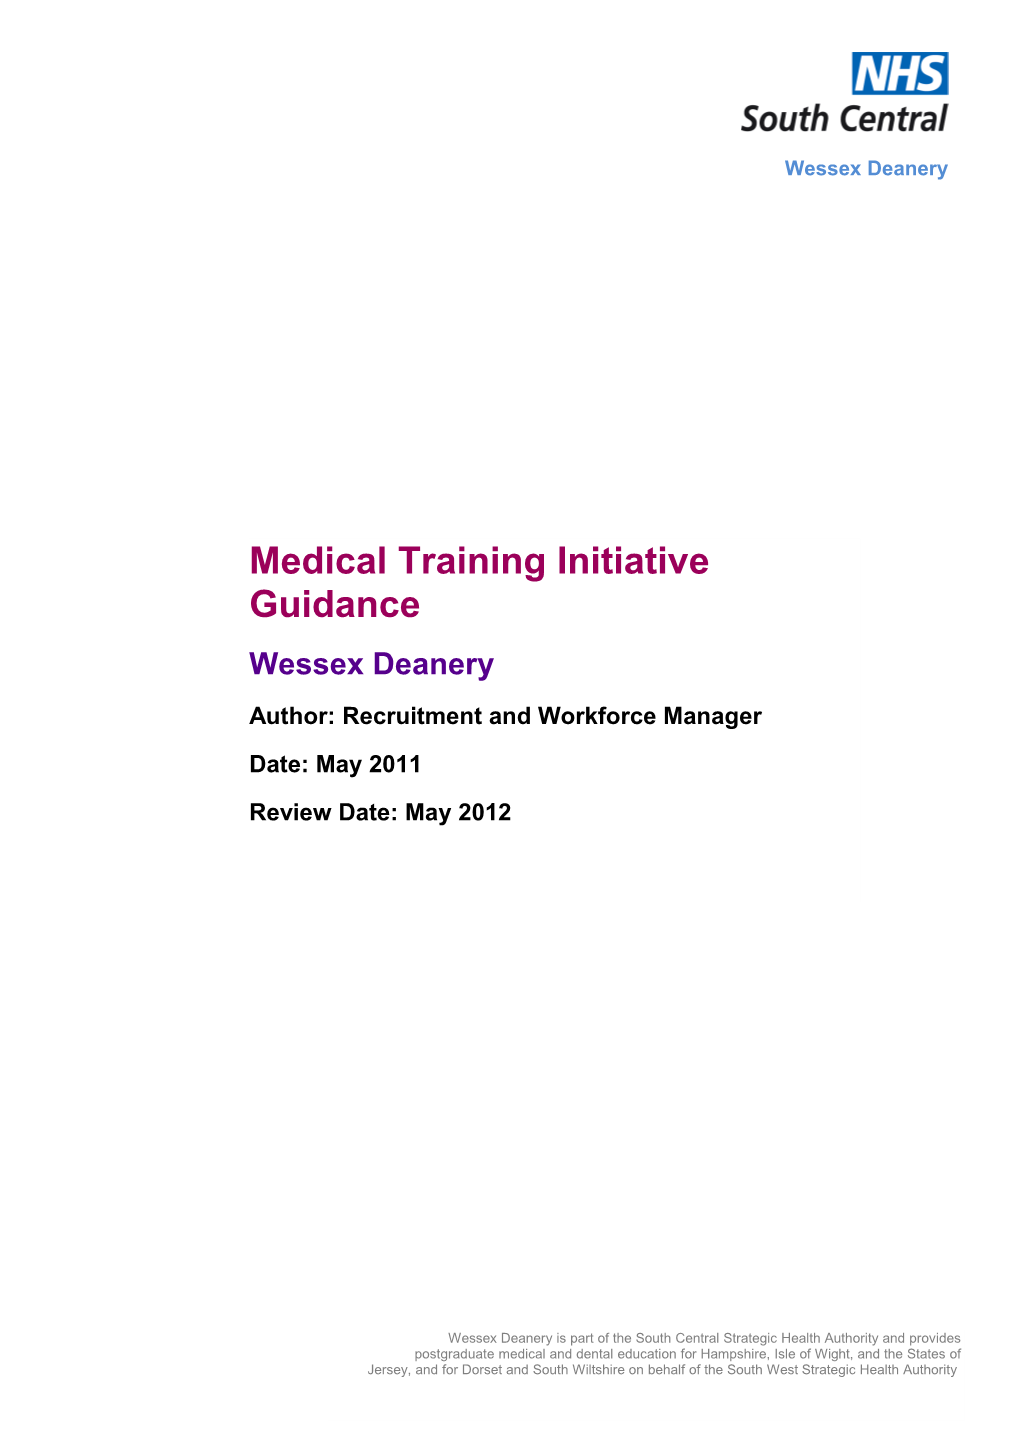 2)Overview of Medical Training Initiative (MTI)